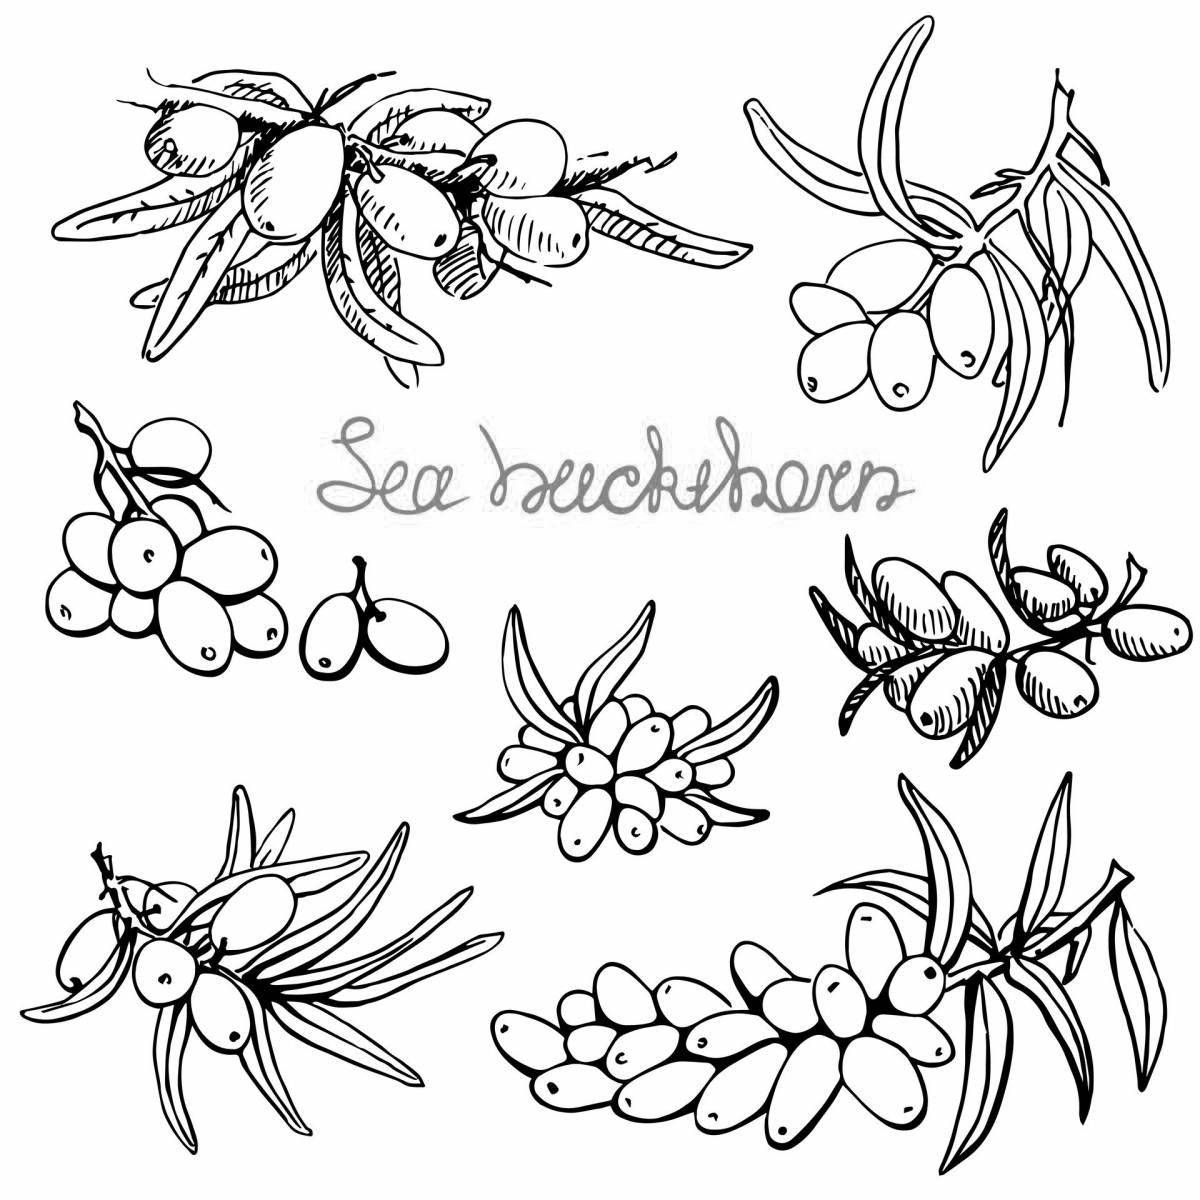 Lovely sea buckthorn coloring page for kids